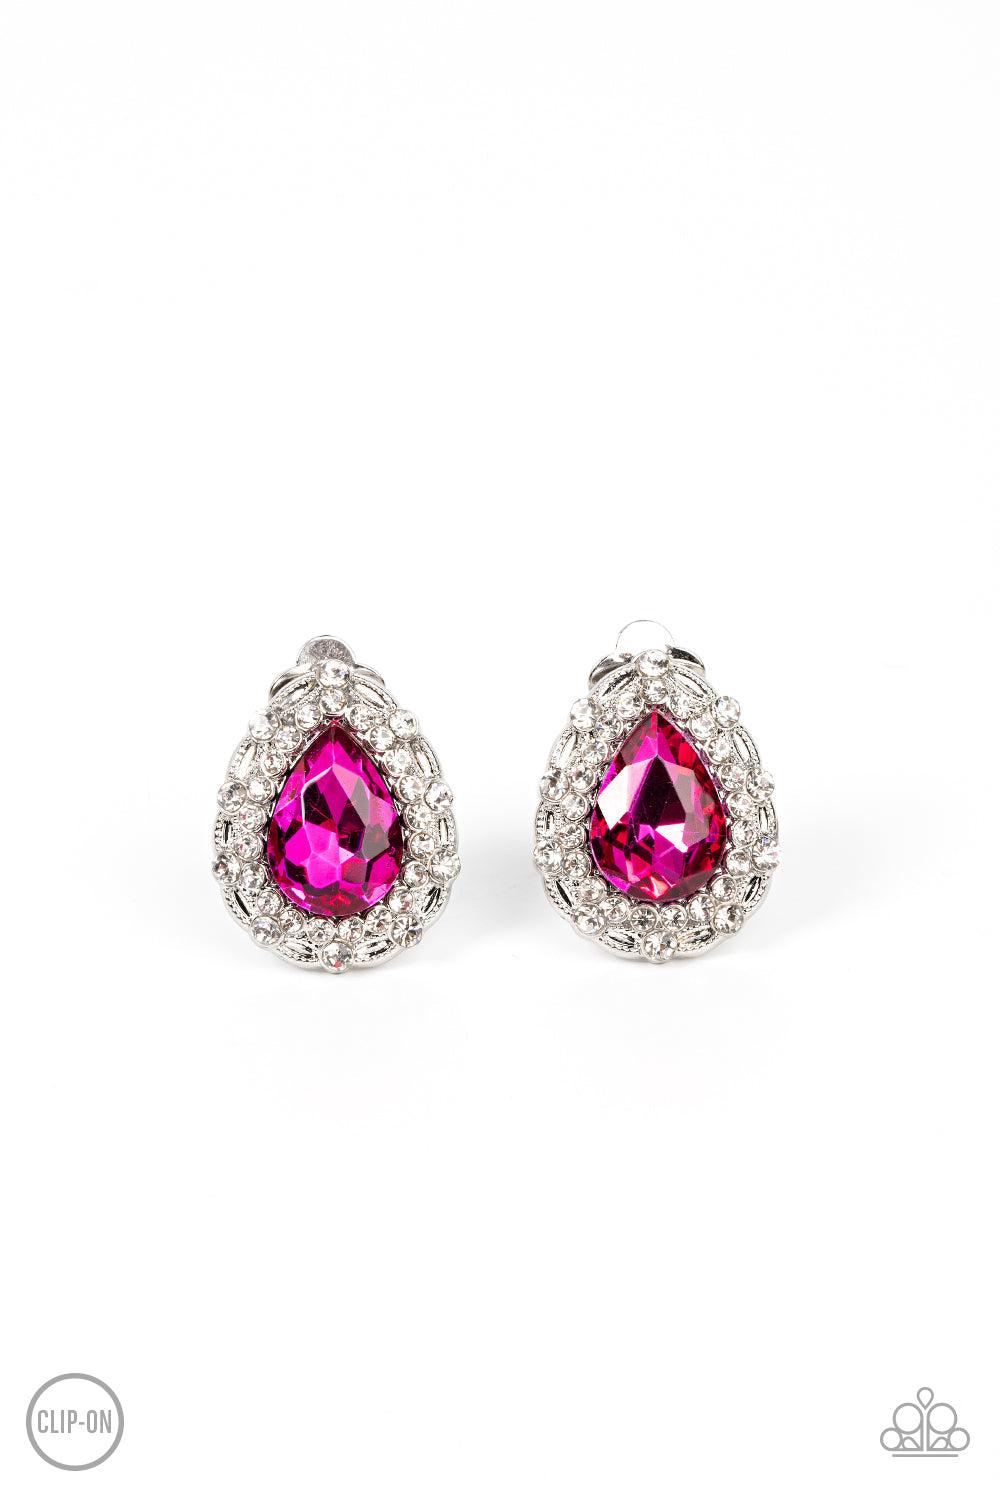 Haute Happy Hour Pink Rhinestone Clip-On Earrings - Paparazzi Accessories- lightbox - CarasShop.com - $5 Jewelry by Cara Jewels